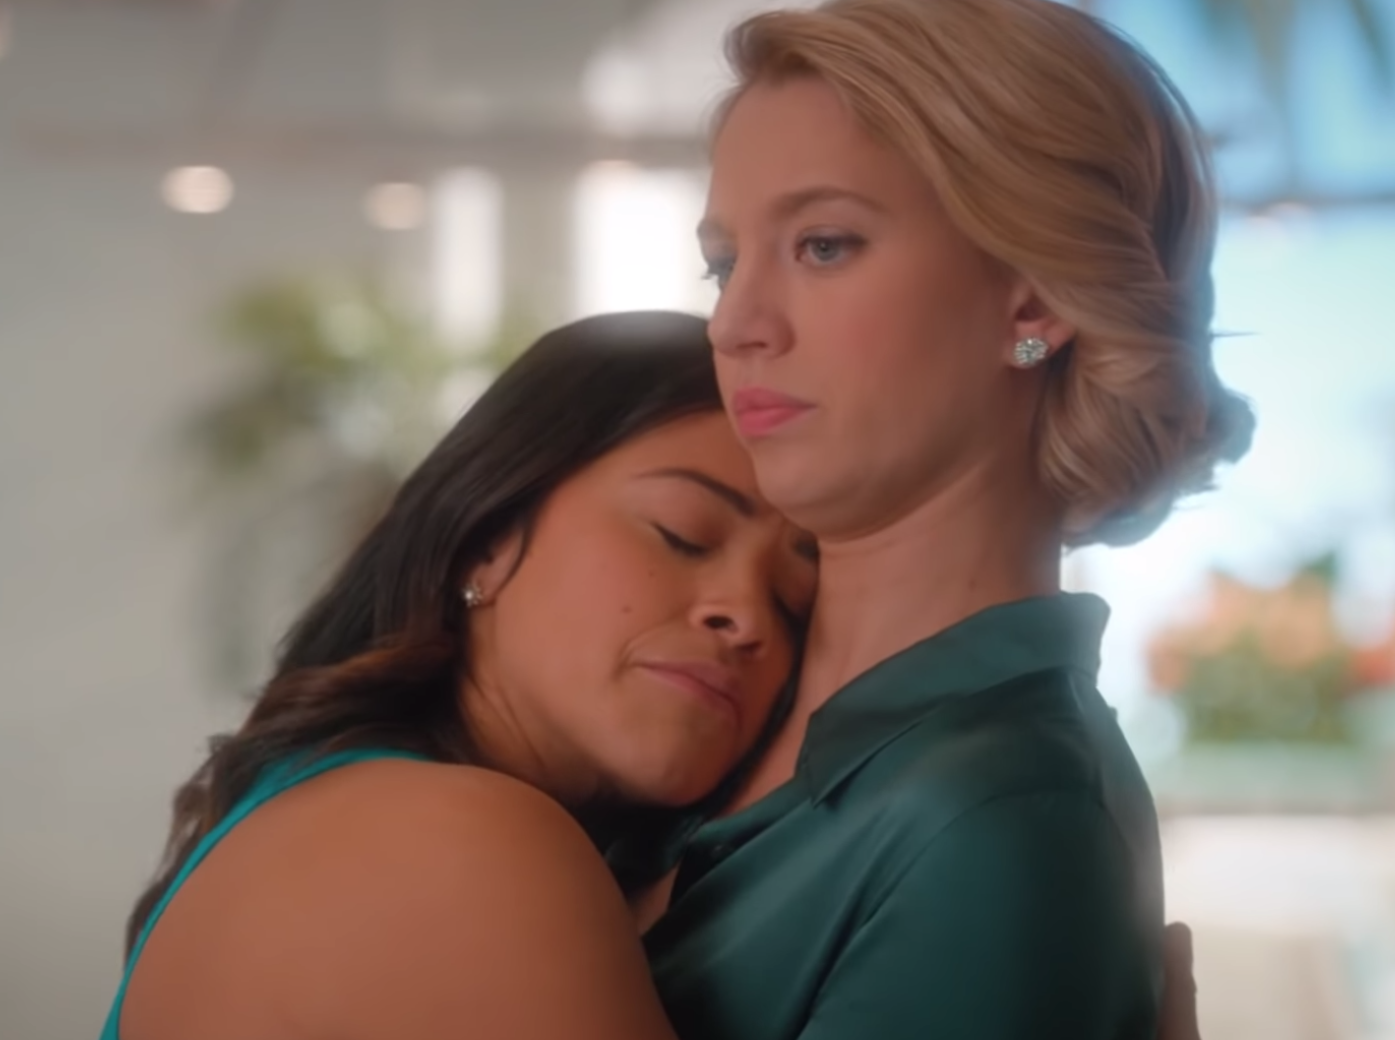 Jane Villanueva hugs Petra Solano tightly as Petra pretends to look annoyed about it